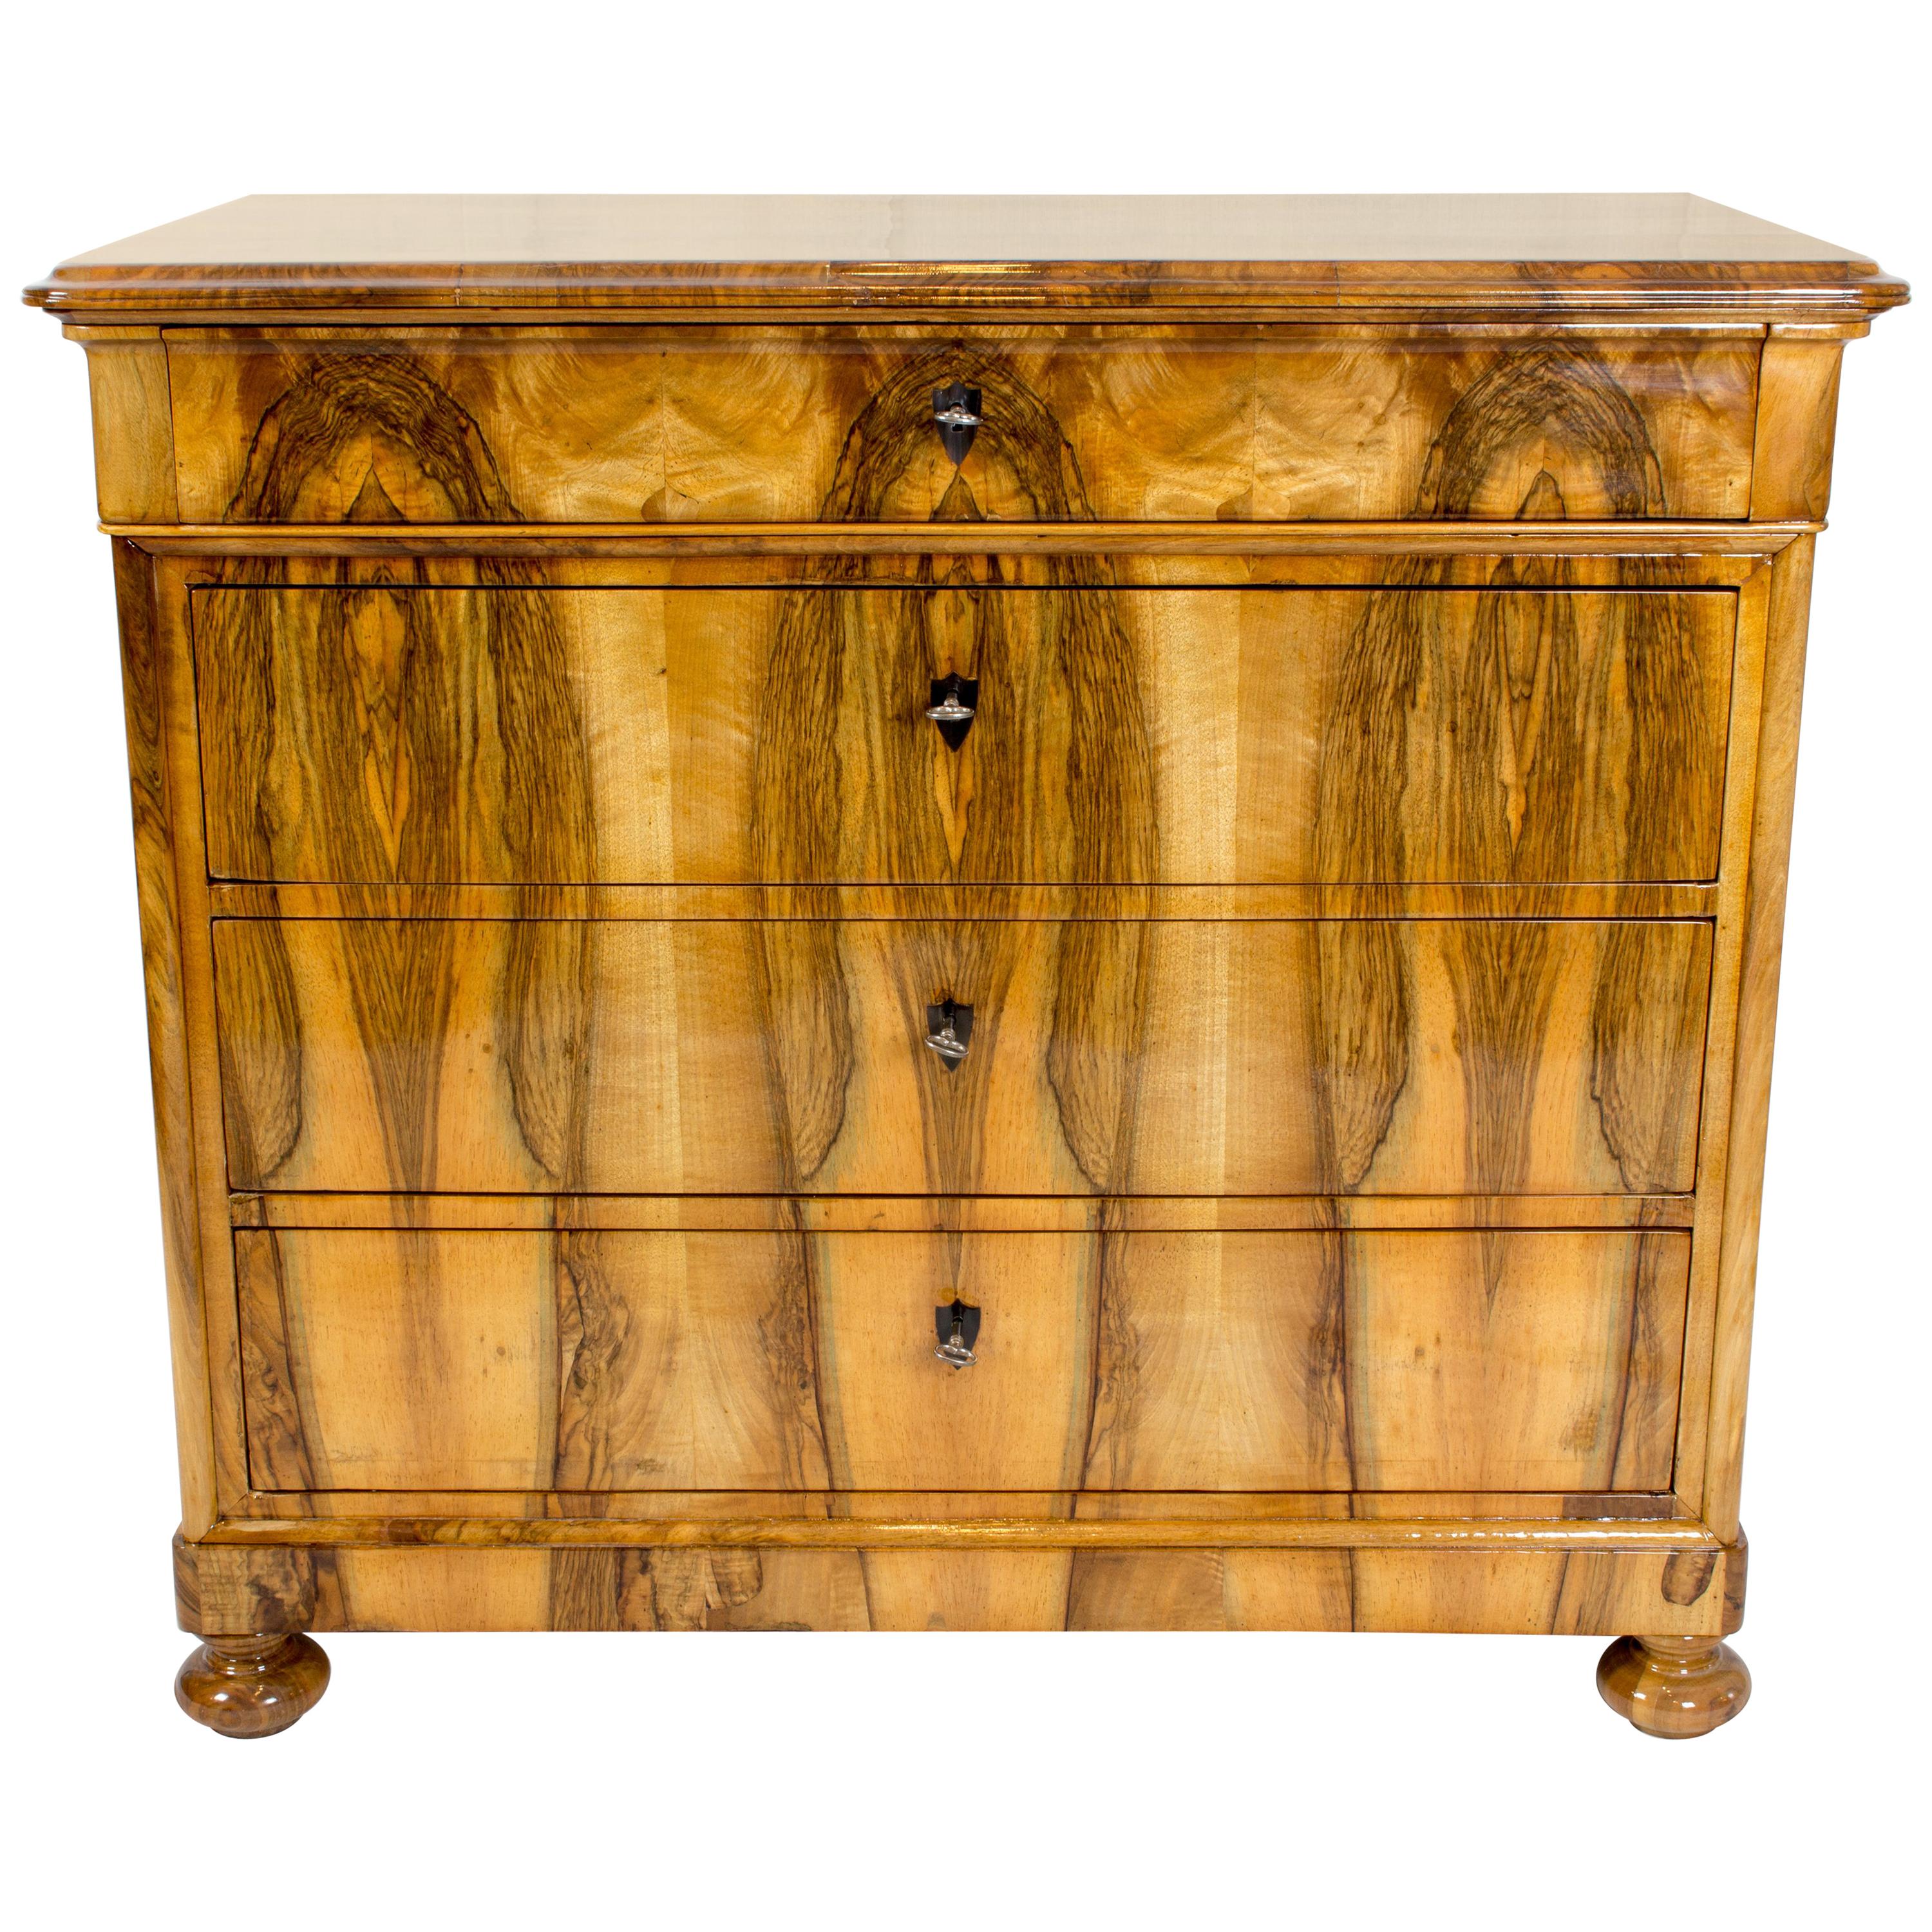 Early 19th Century Biedermeier Walnut Chest of Drawers or Commode